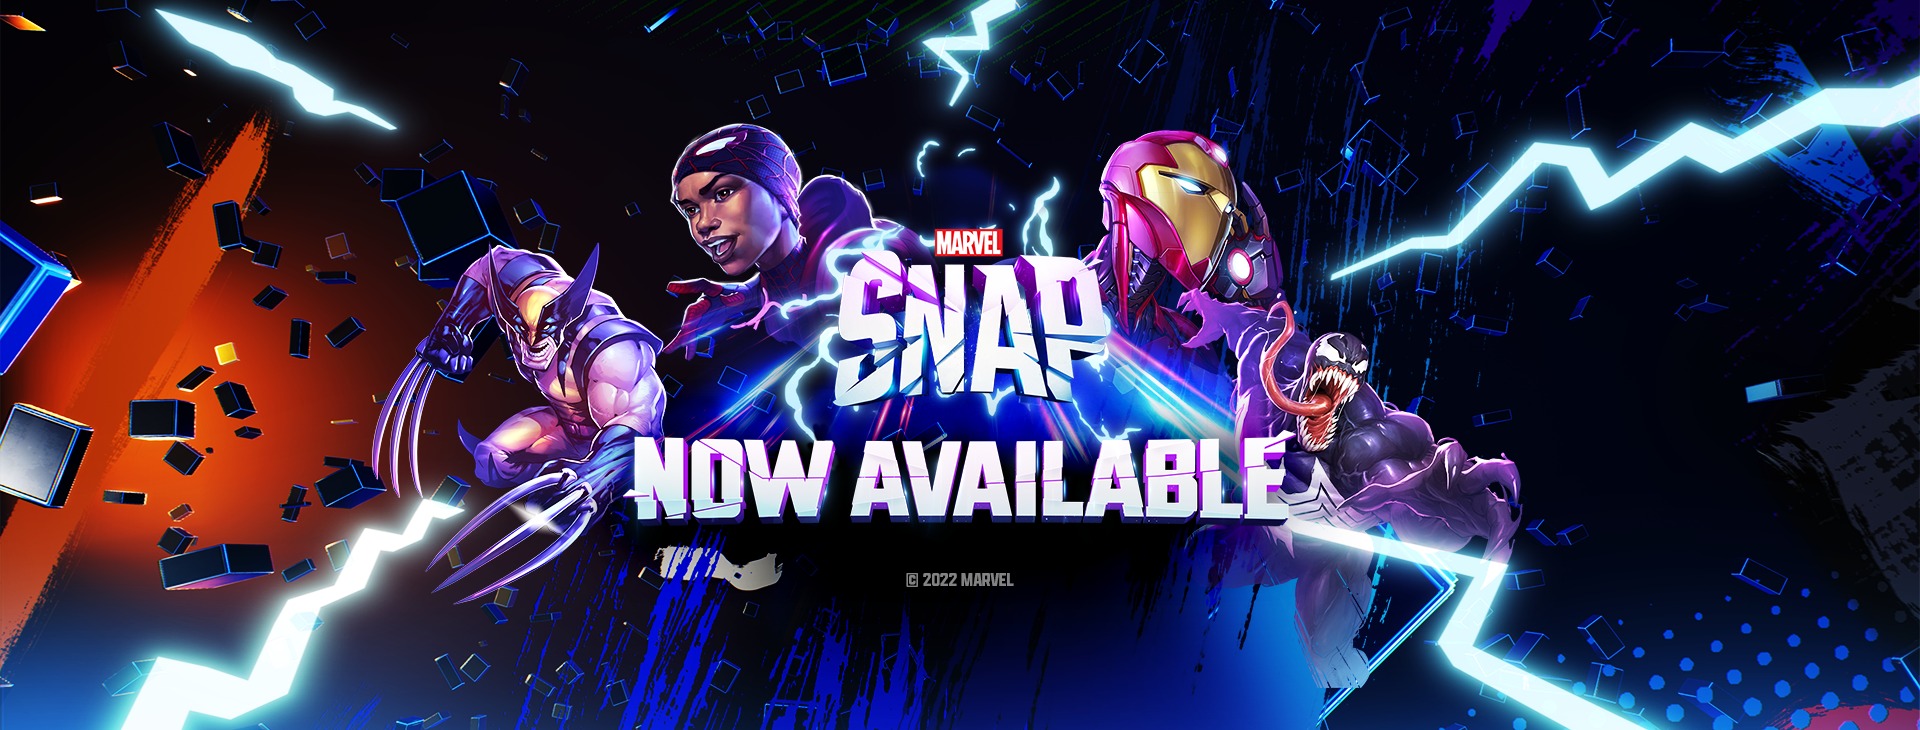 Marvel Snap has officially launched on Steam